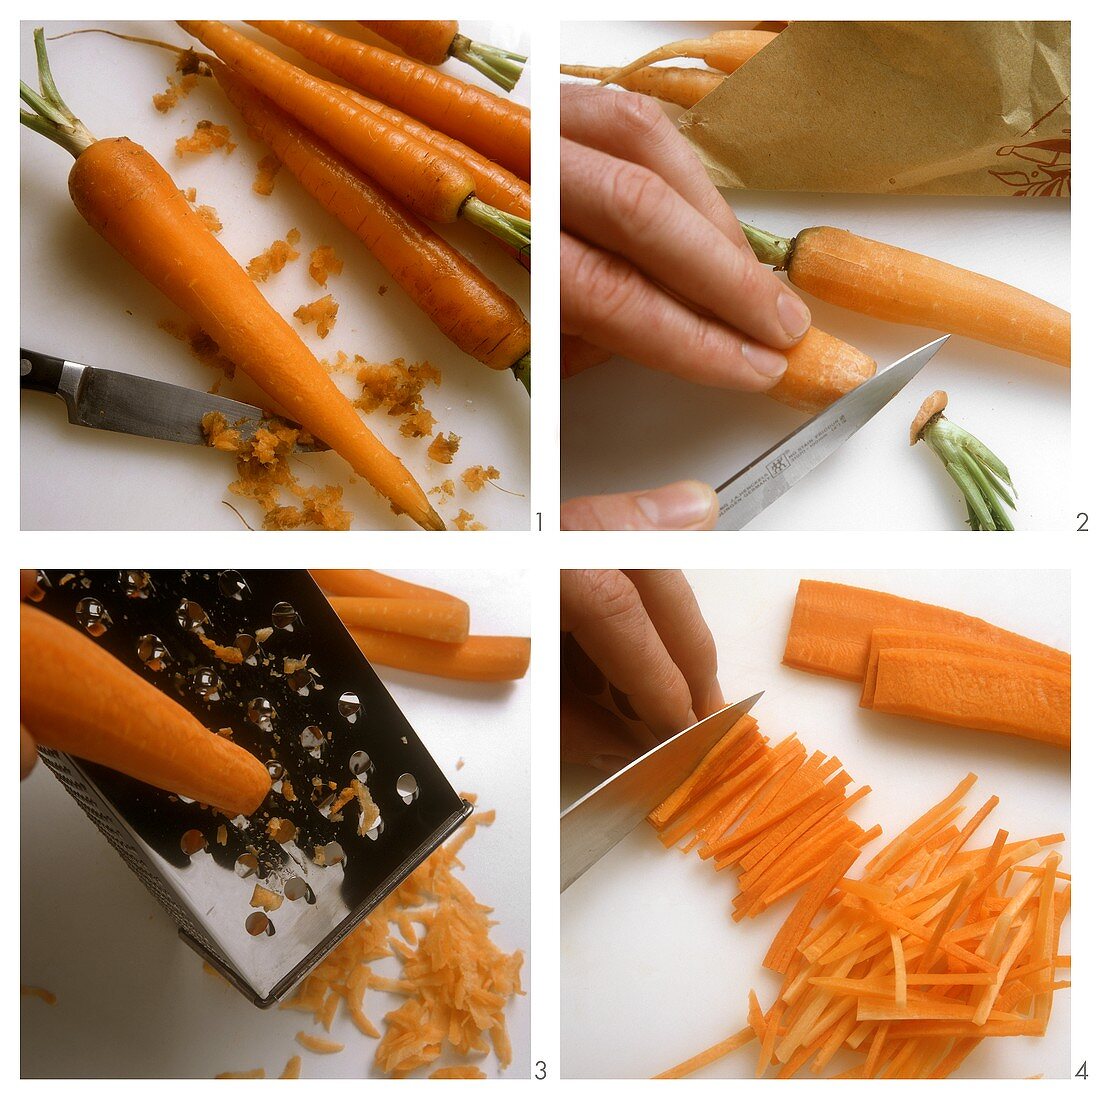 Cleaning, grating or slicing carrots